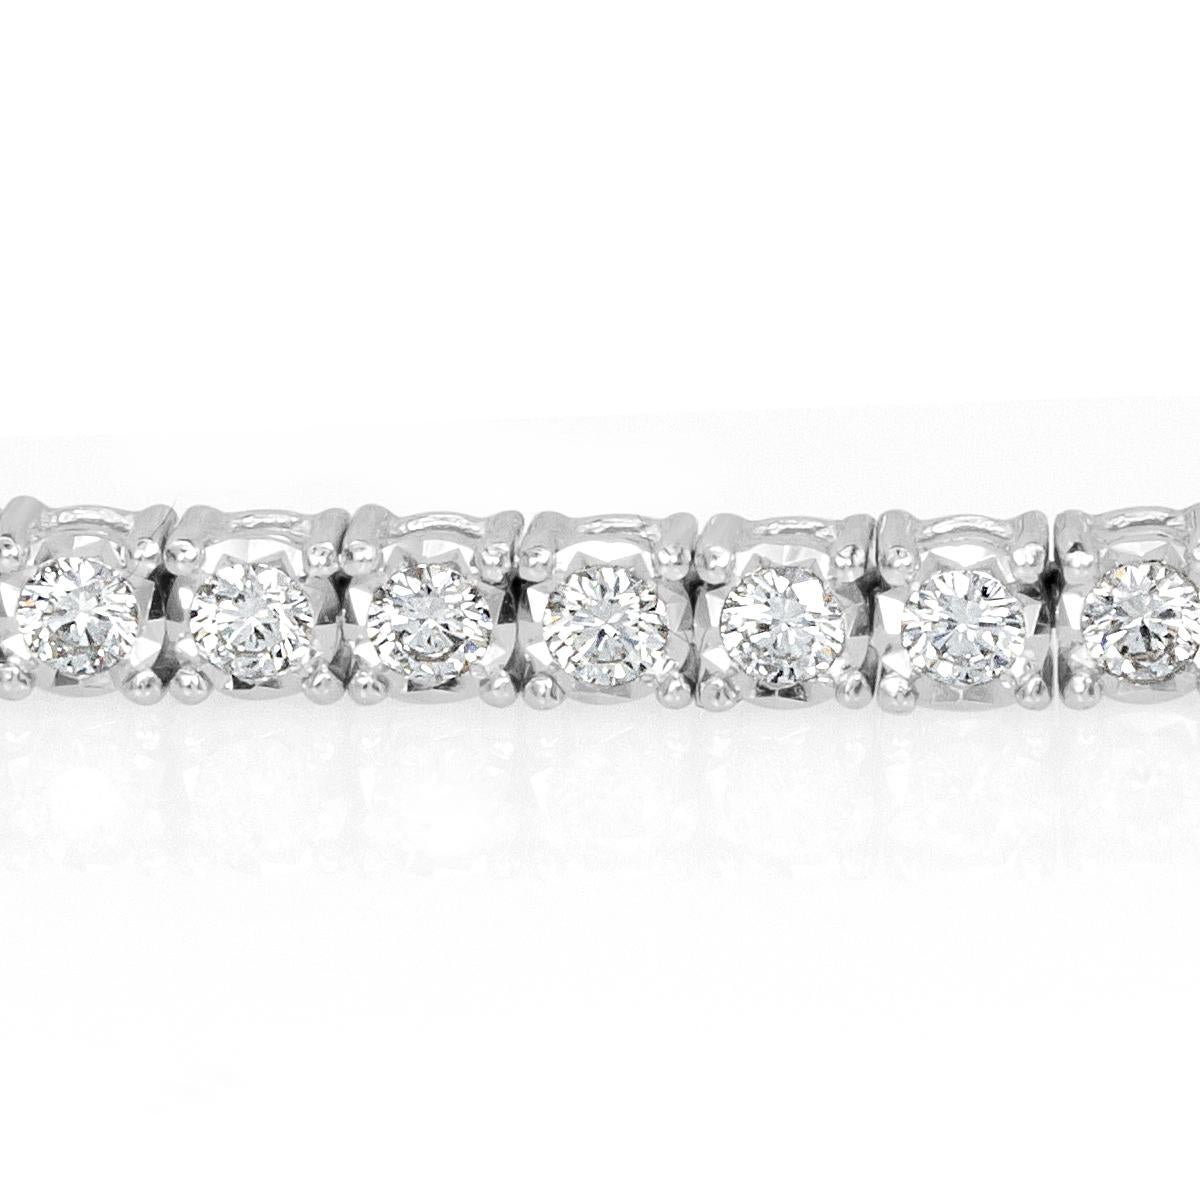 This exquisite diamond tennis bracelet showcases 2.21ct of perfectly matched round brilliant cut diamonds graded at F-G in color, VS1-VS2 in clarity. The diamonds are set in a classic, 14k white gold setting with double safety clasp for added